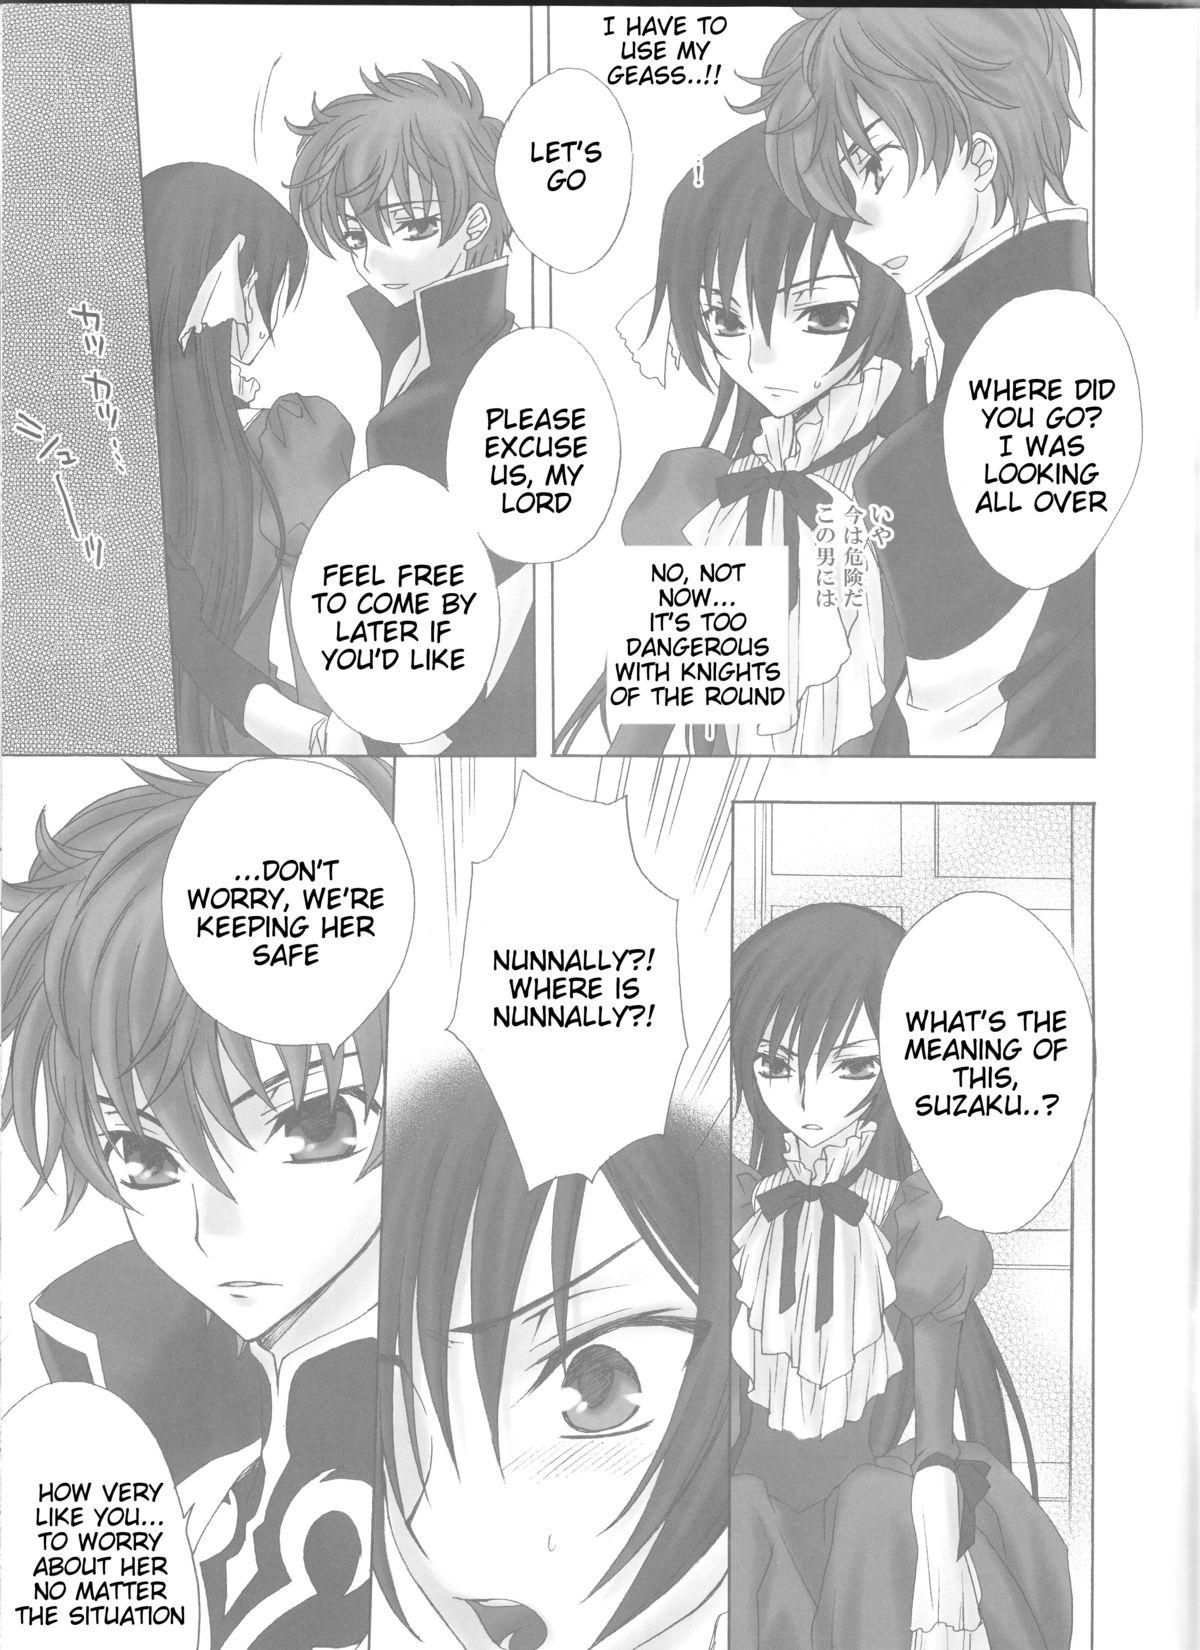 Class Room Dolce Rose - Code geass Climax - Page 5